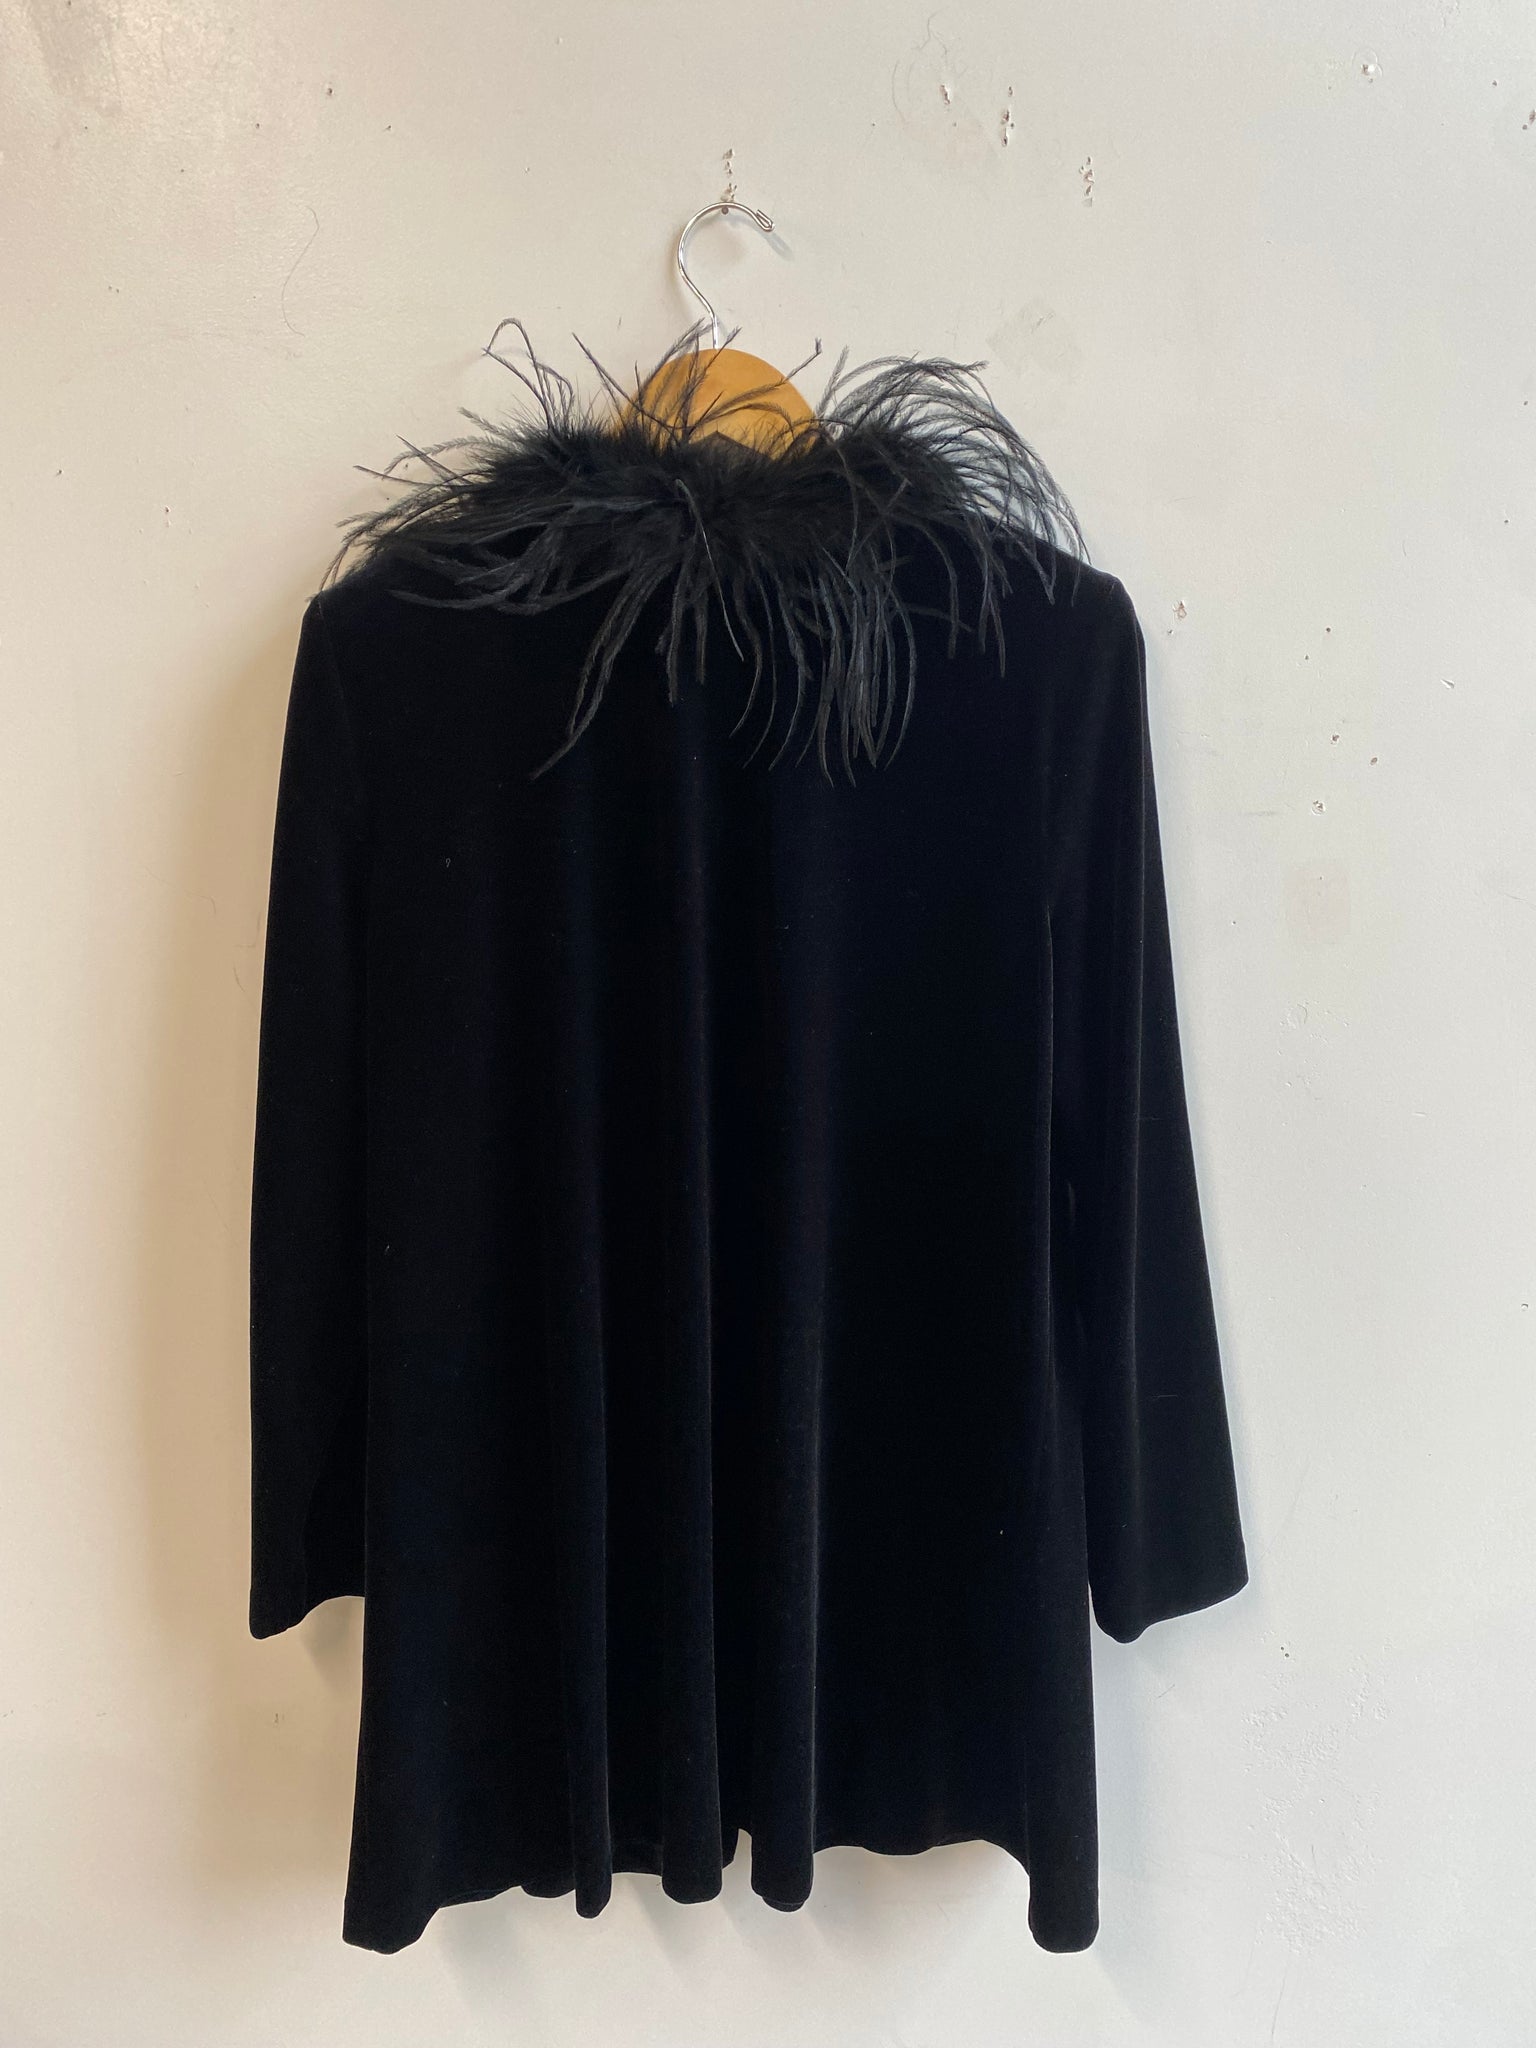 90s Black Velvet and Ostrich Feather Jacket